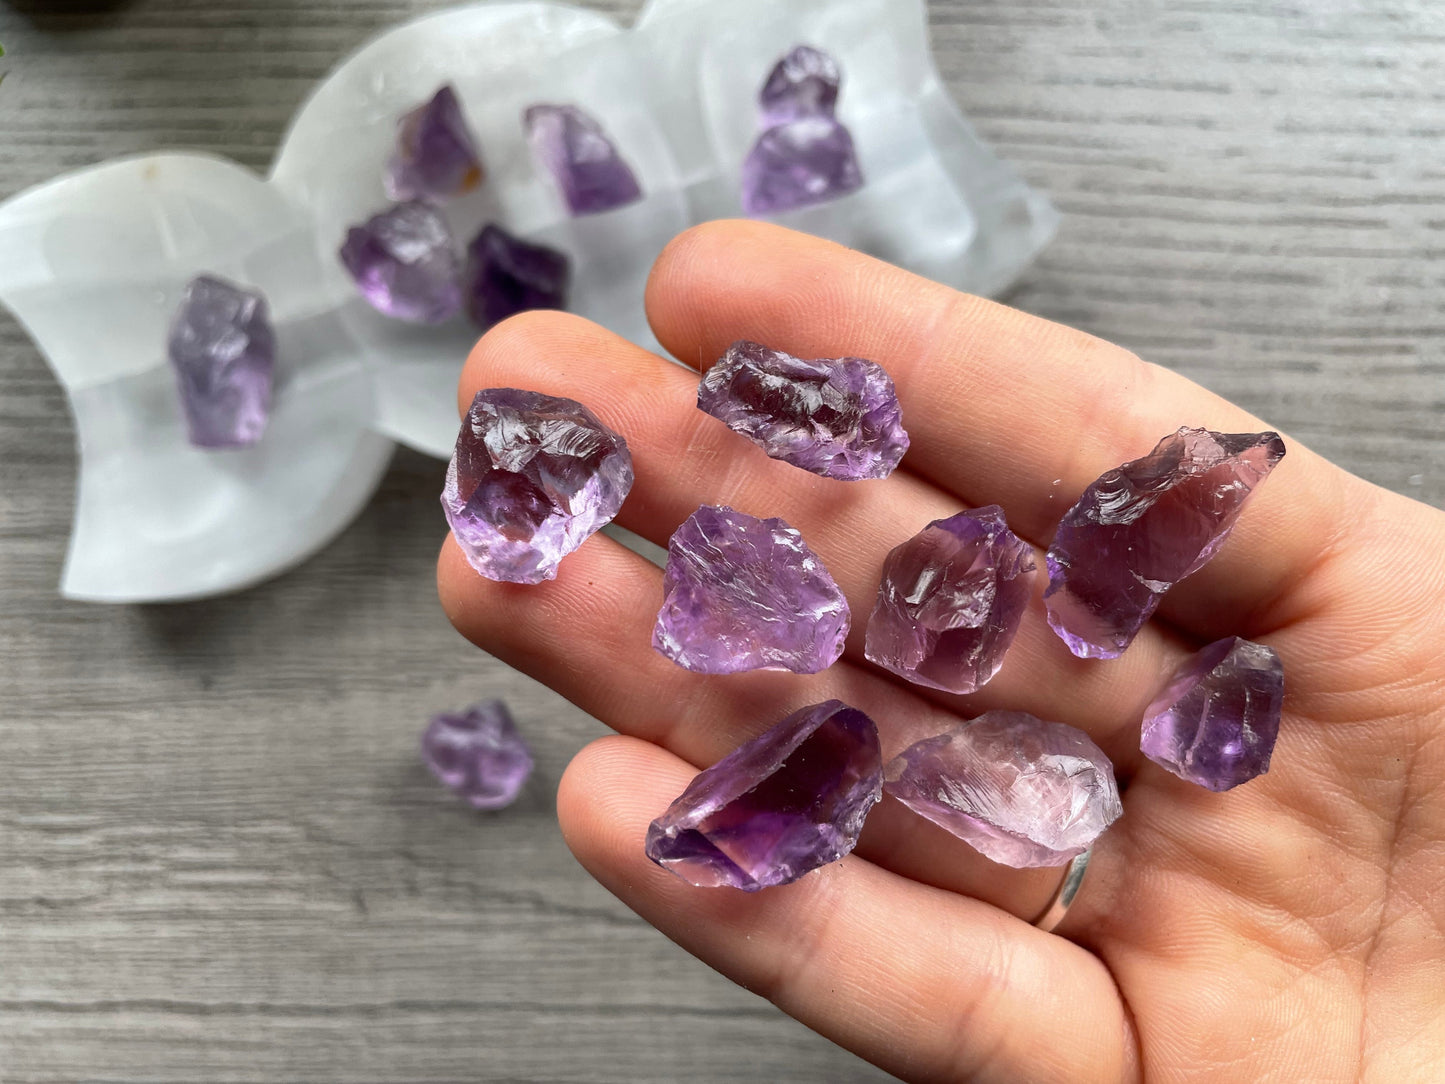 Pictured are pieces of raw amethyst.